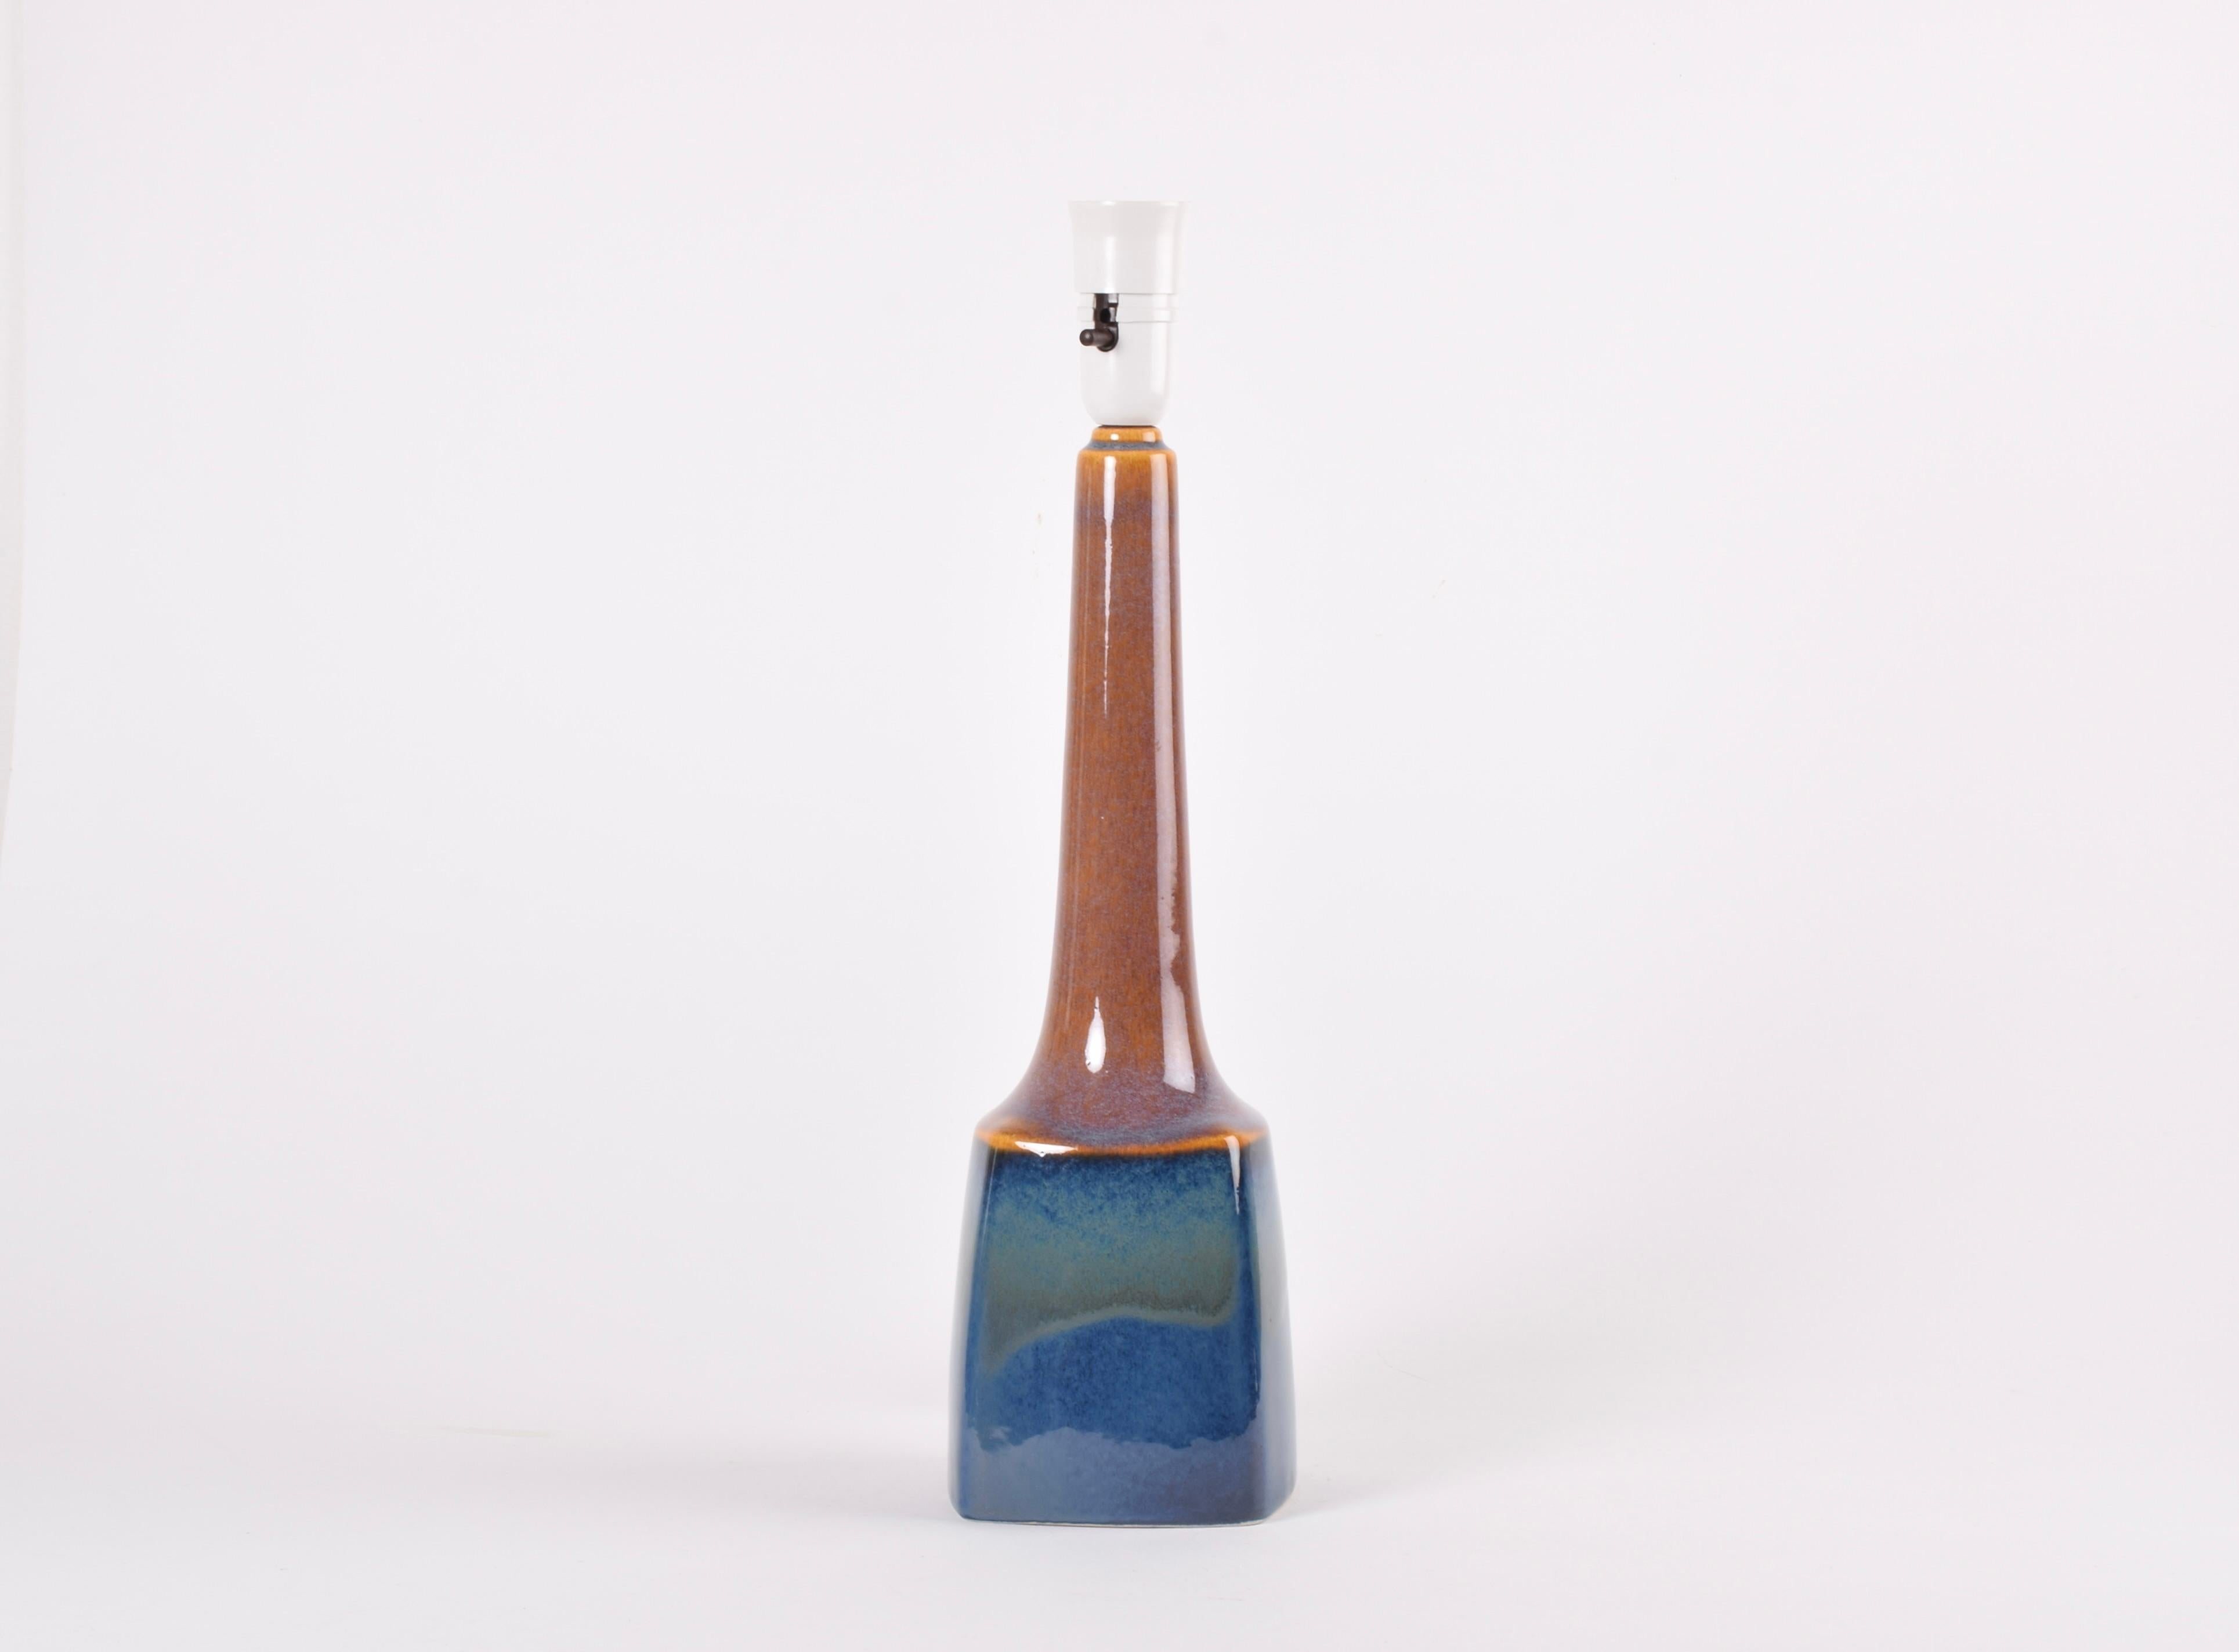 Tall Søholm Table Lamp with Blue Brown Glaze, Danish Modern Ligthing 1960s In Good Condition For Sale In Aarhus C, DK